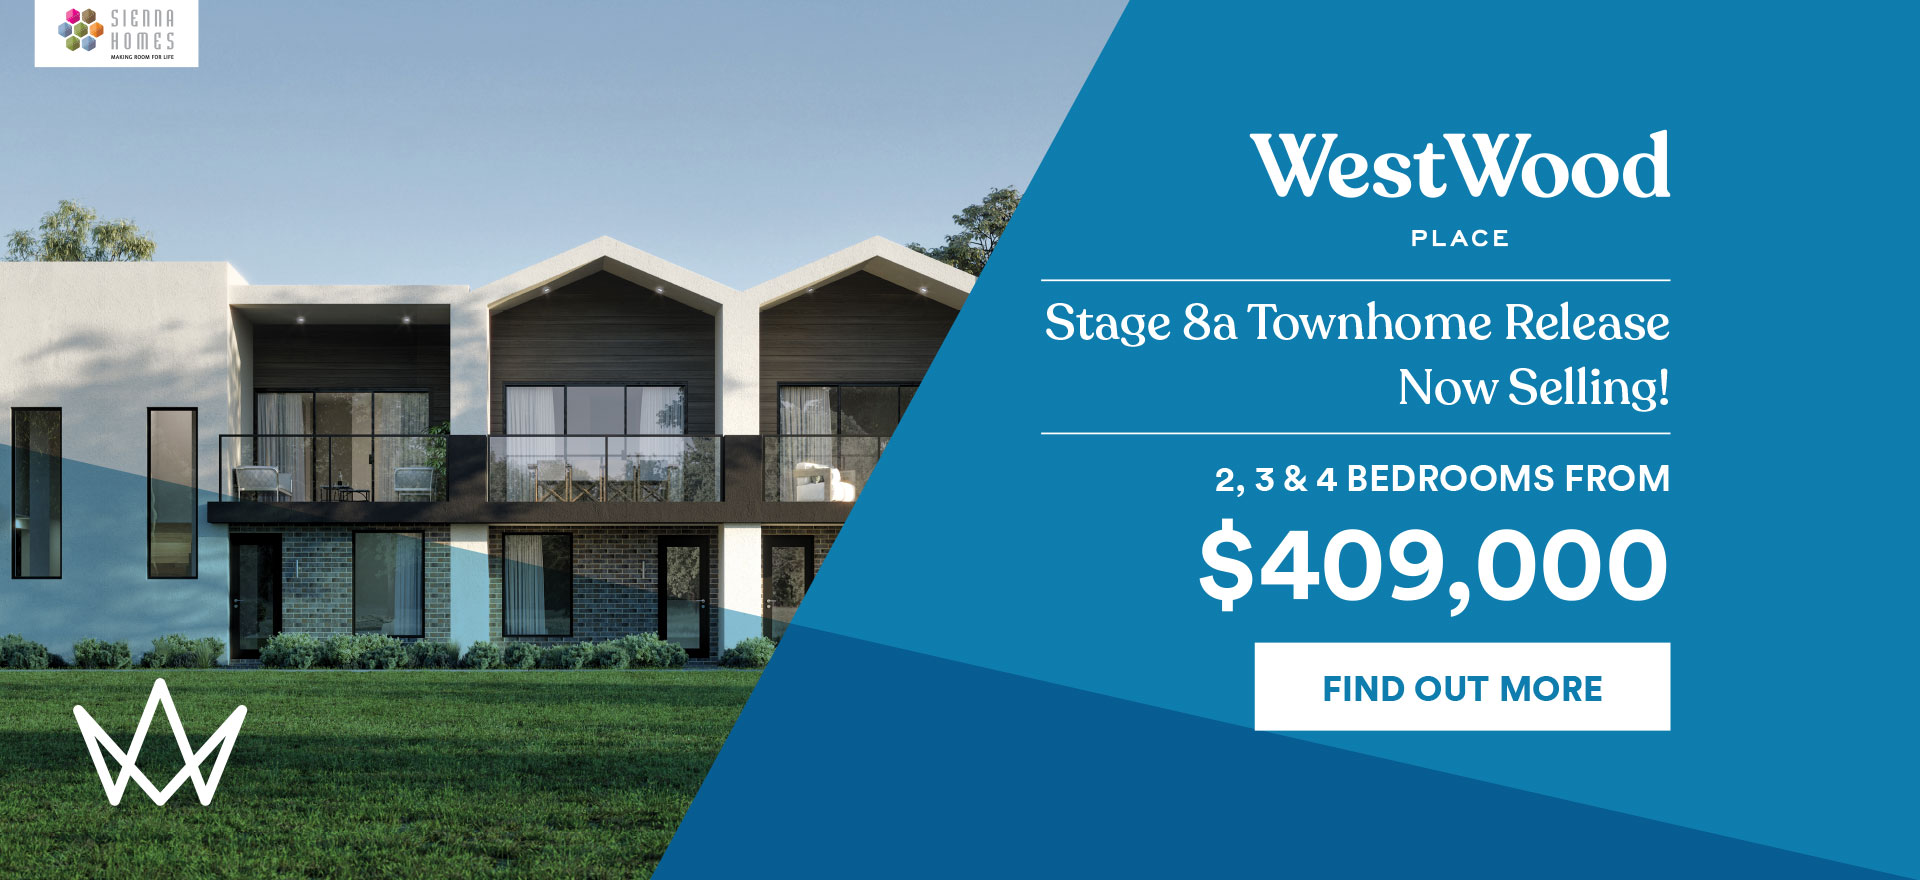 Stage 8a Townhome Release Now Selling!